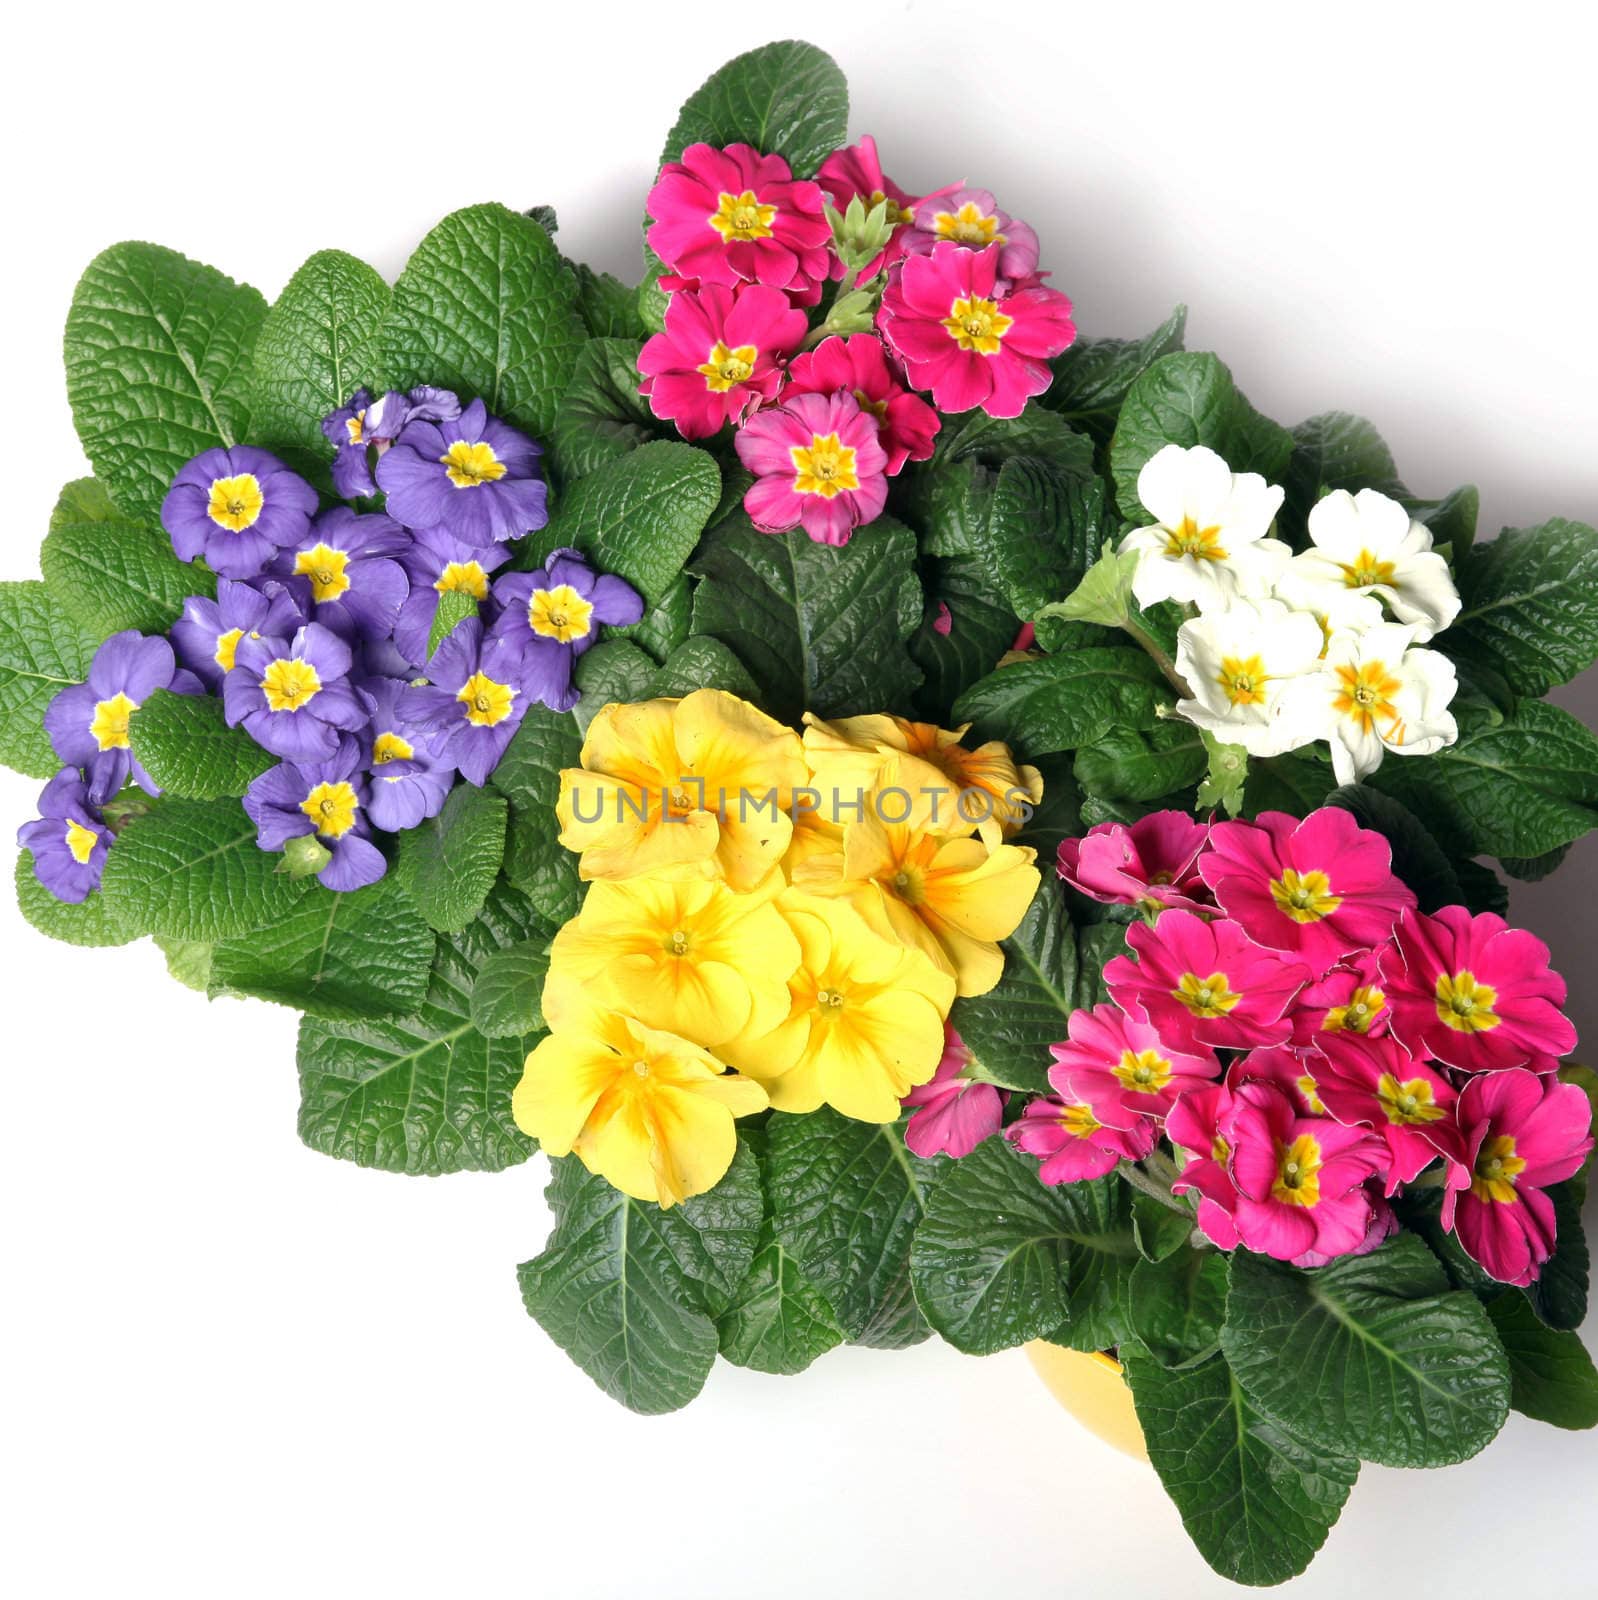 Colorful primroses from the top by Farina6000